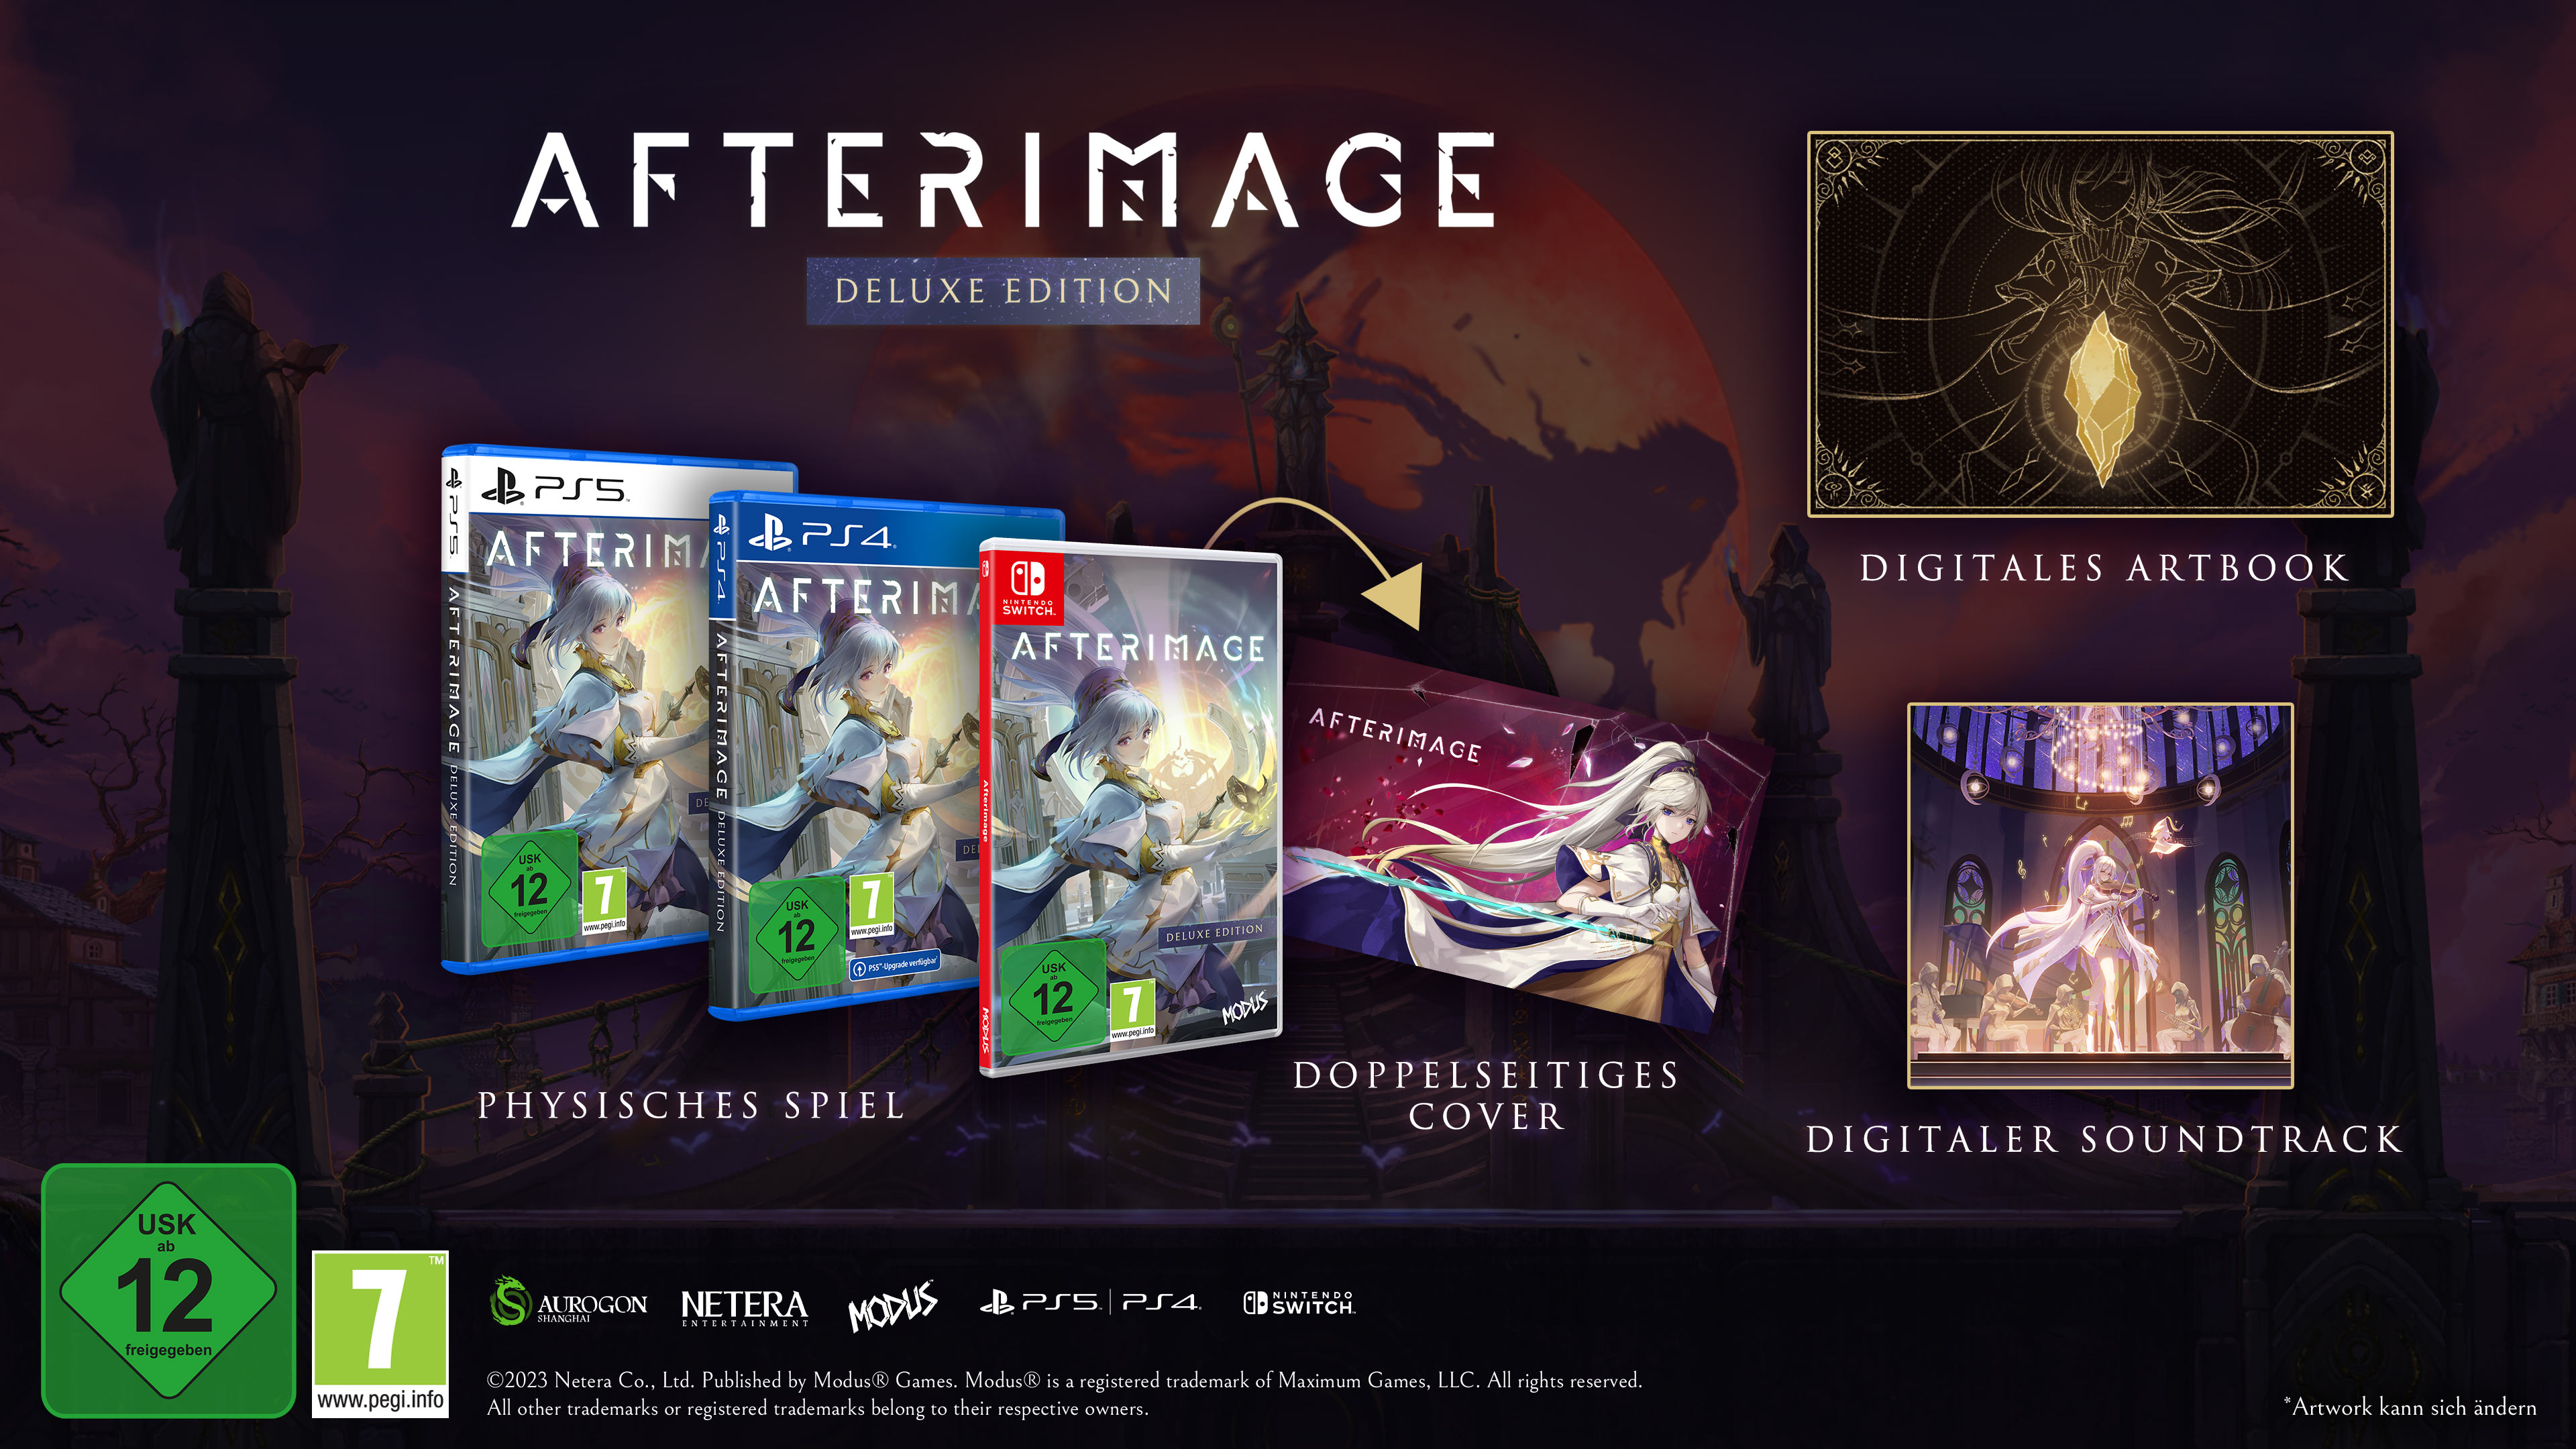 Afterimage: Deluxe Switch] Edition - [Nintendo